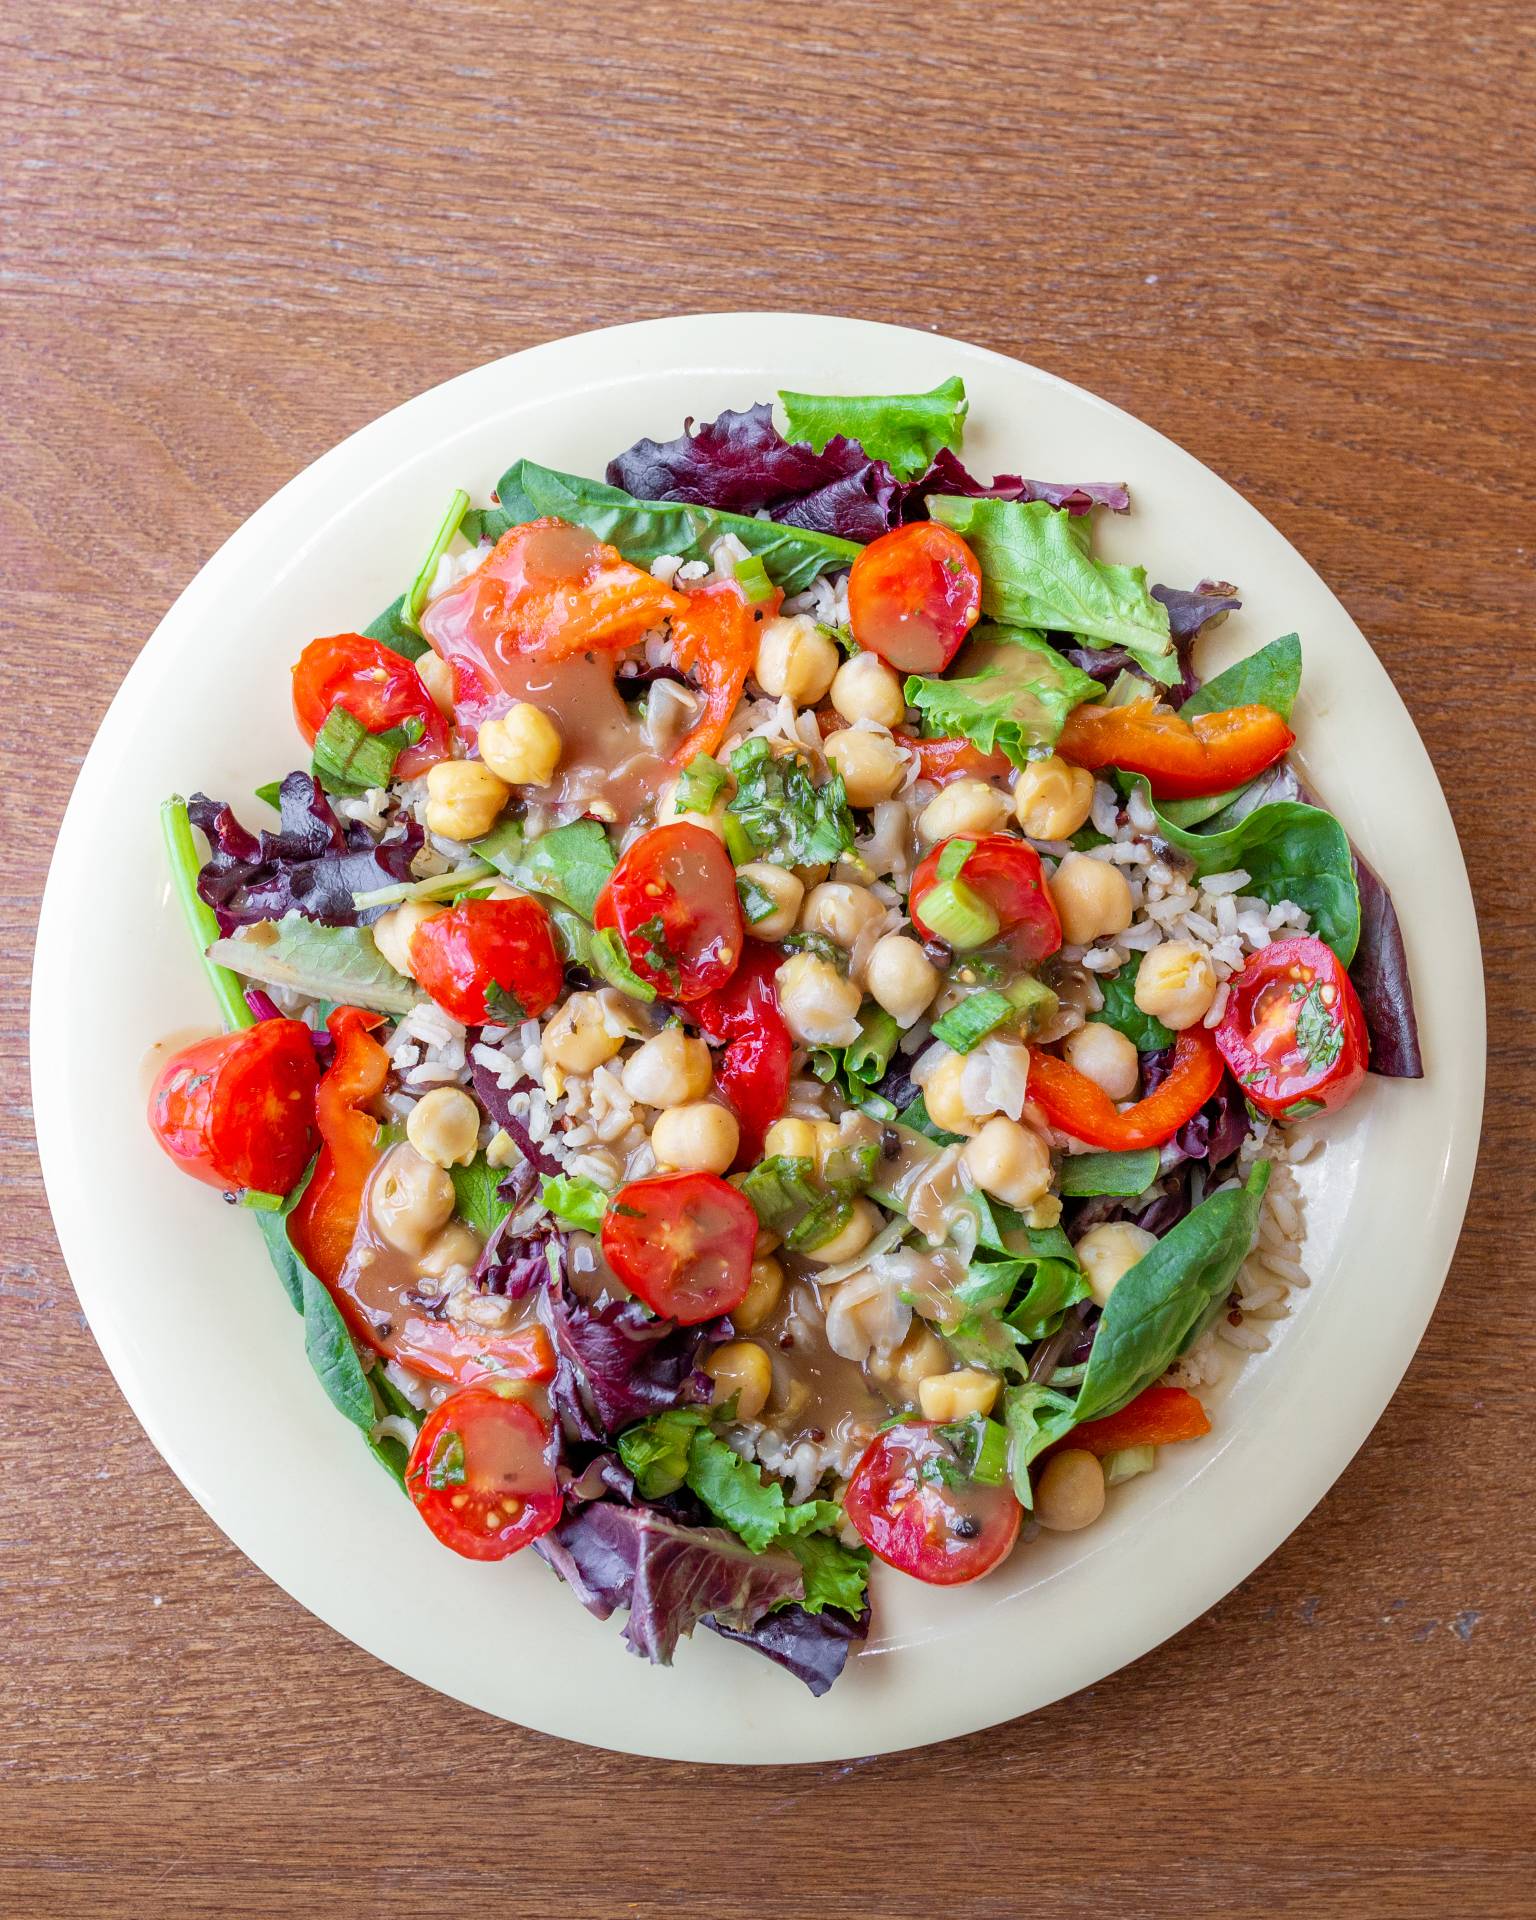 A photograph of a plate with rice, chickpeas, leafy greens, and cherry tomatoes.